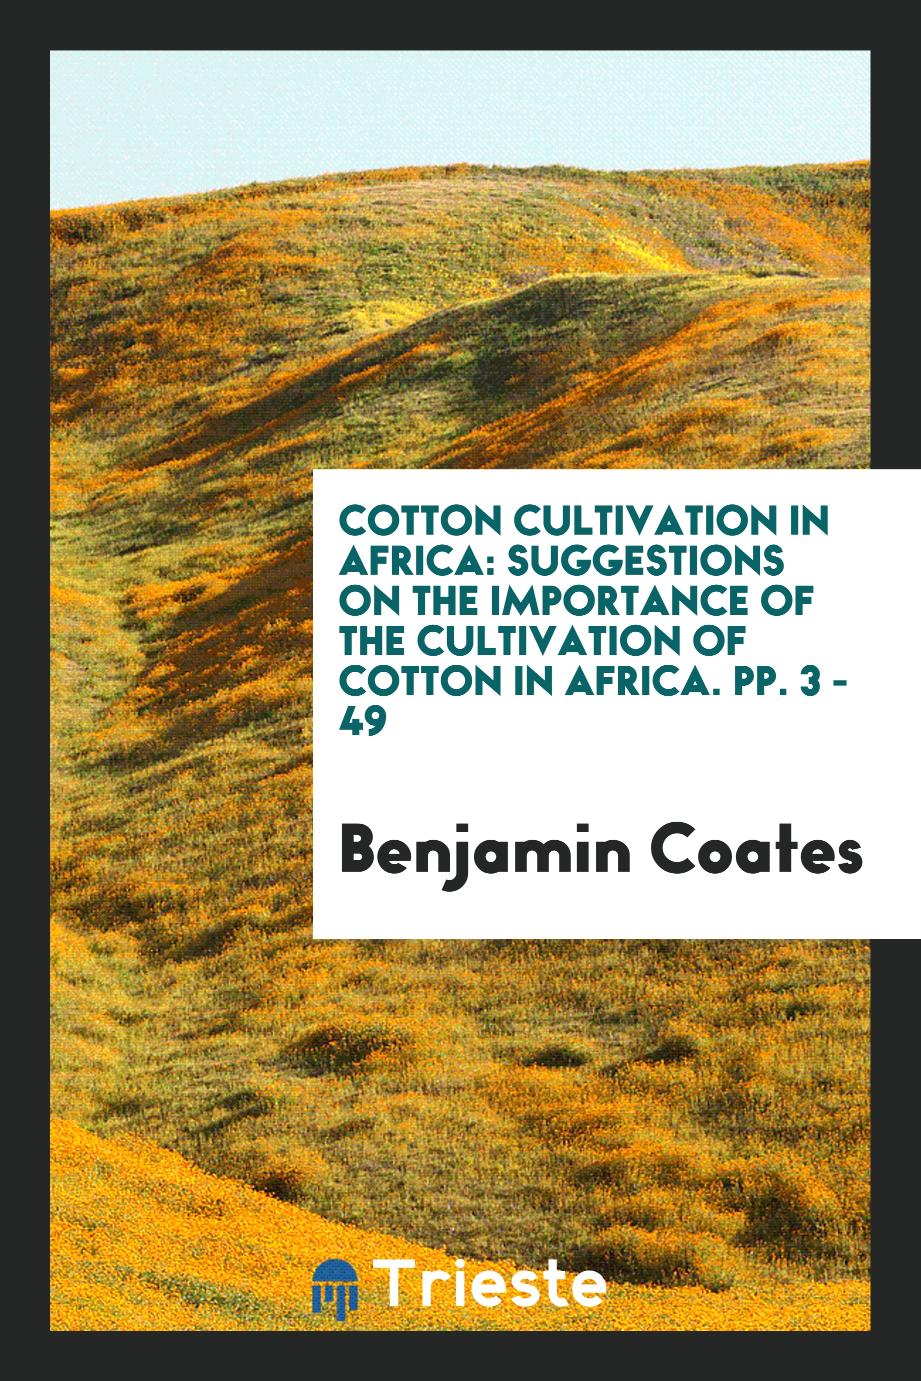 Cotton Cultivation in Africa: Suggestions on the Importance of the Cultivation of Cotton in Africa. pp. 3 - 49